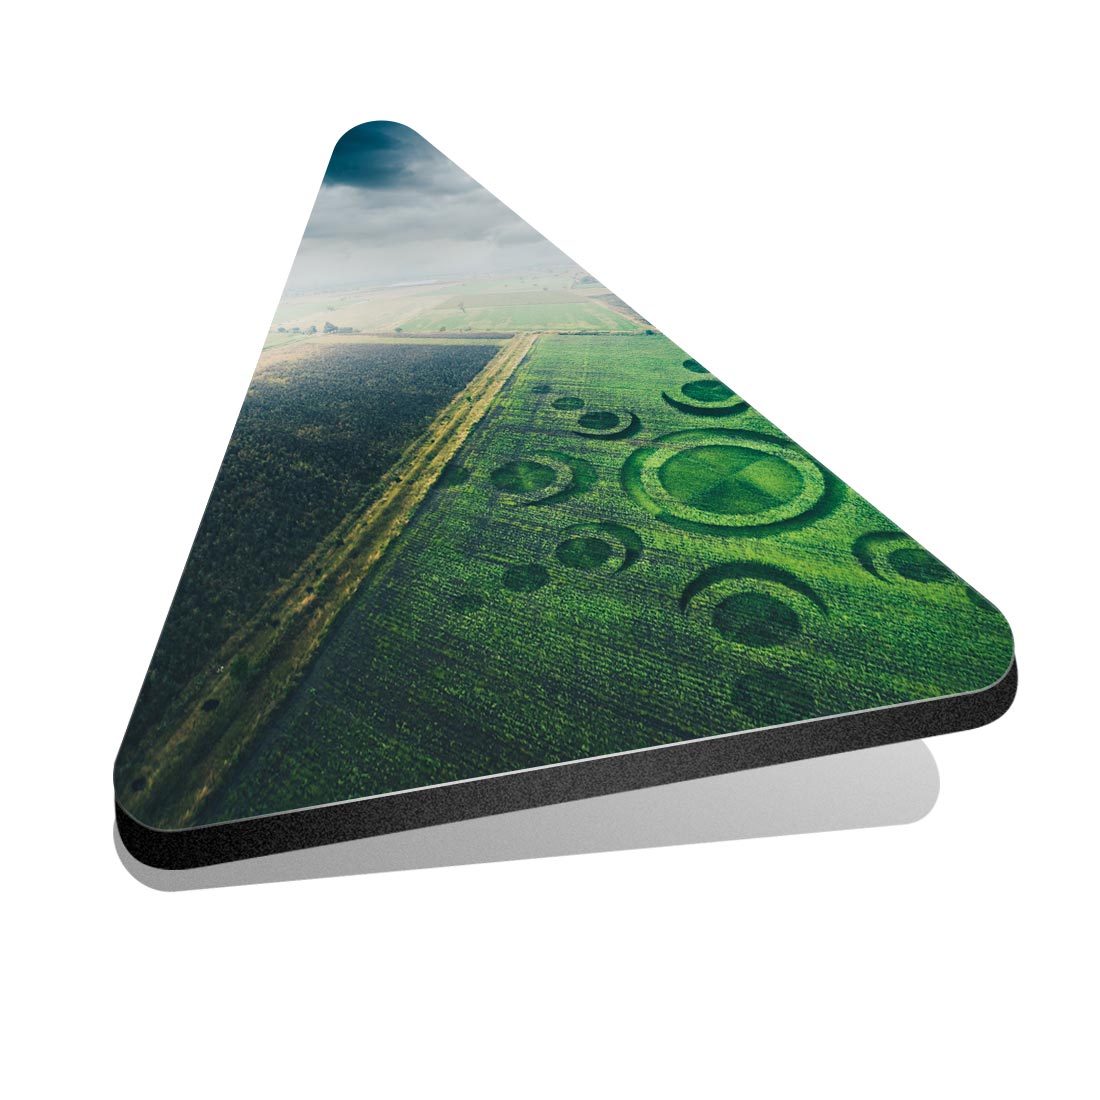 1x Triangle Fridge MDF Magnet Alien Crop Circle #50066 - Picture 1 of 1